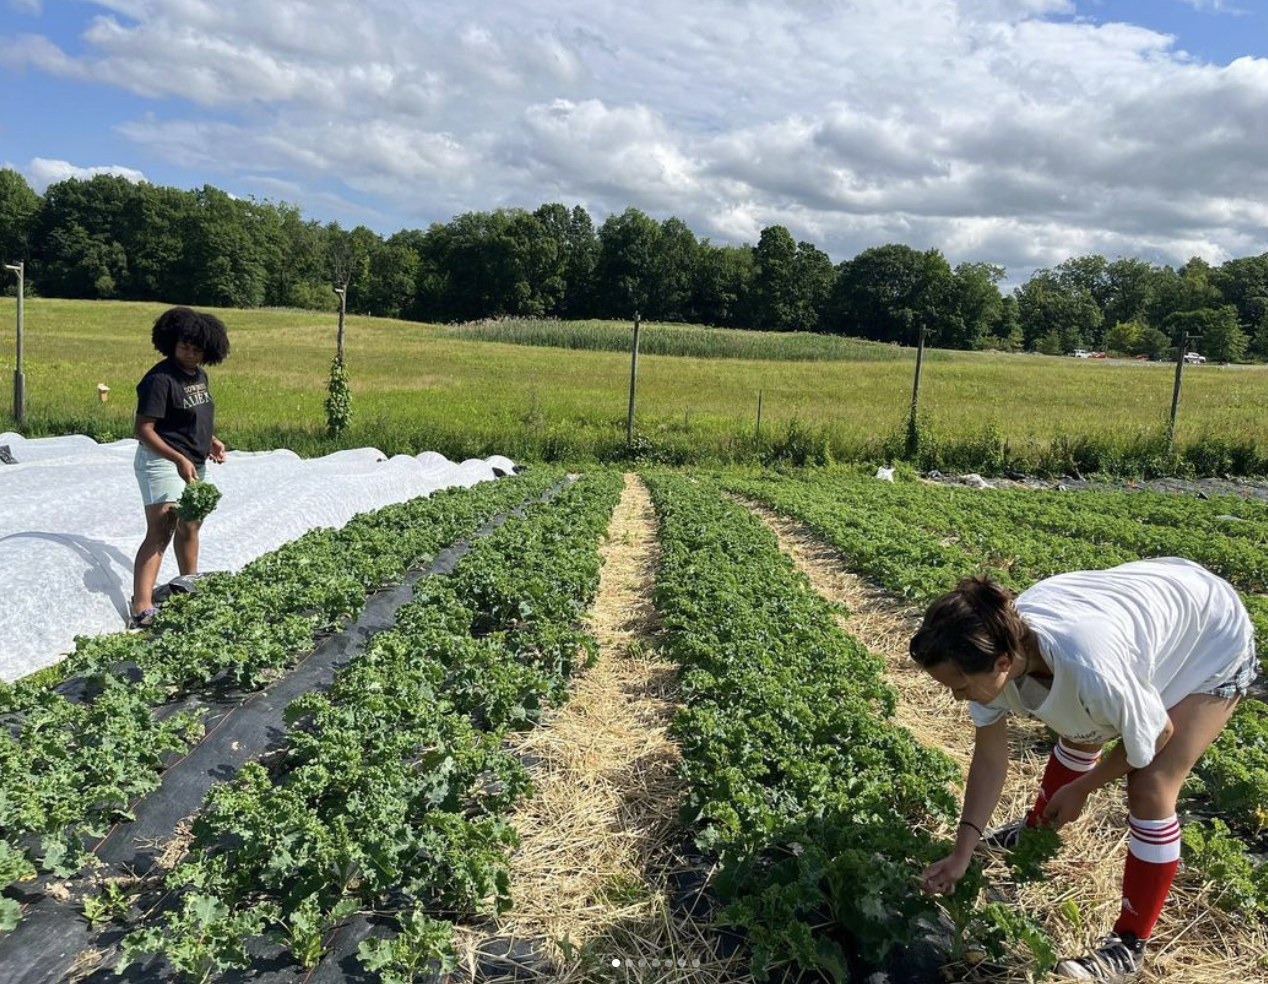 Current students at the Bard Farm. Visit the student-run weekly farm stand from June to October, rain or shine, every Thursday from 12 to 5 pm. The farm stand is now located on Library Road near Gilson Place. Photo courtesy of the @bardfarm Instagram.